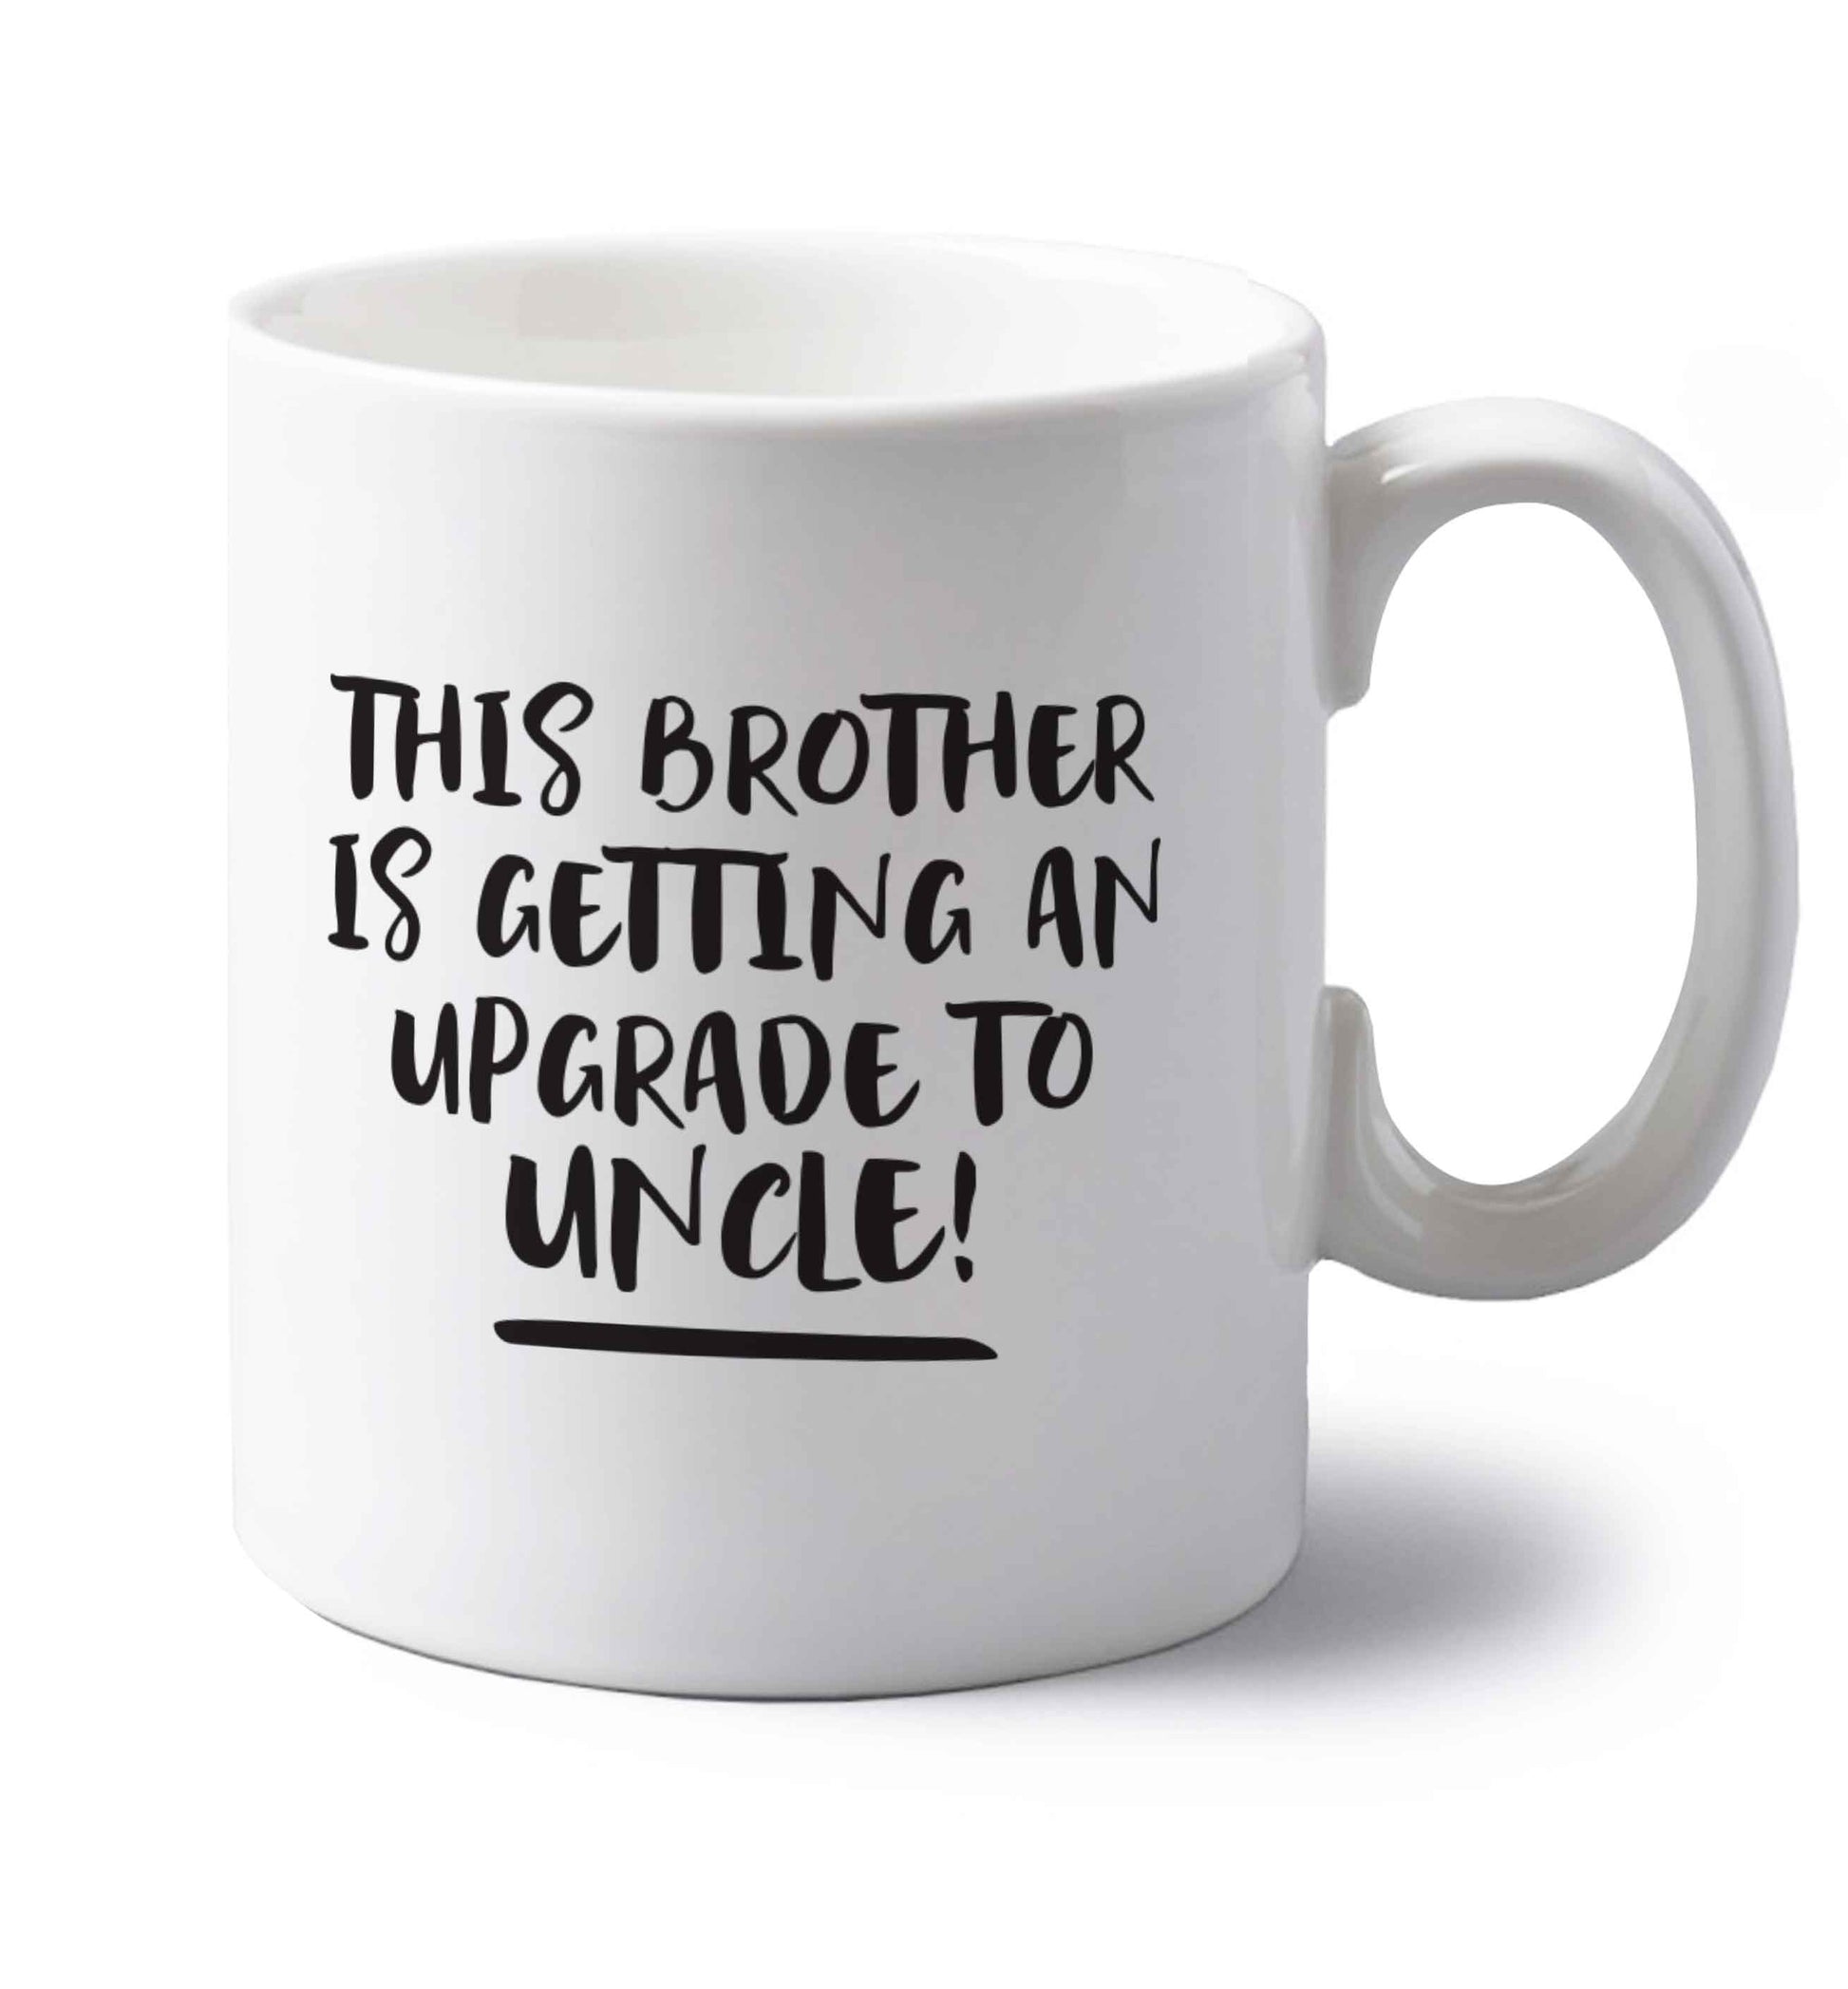 This brother is getting an upgrade to uncle! left handed white ceramic mug 